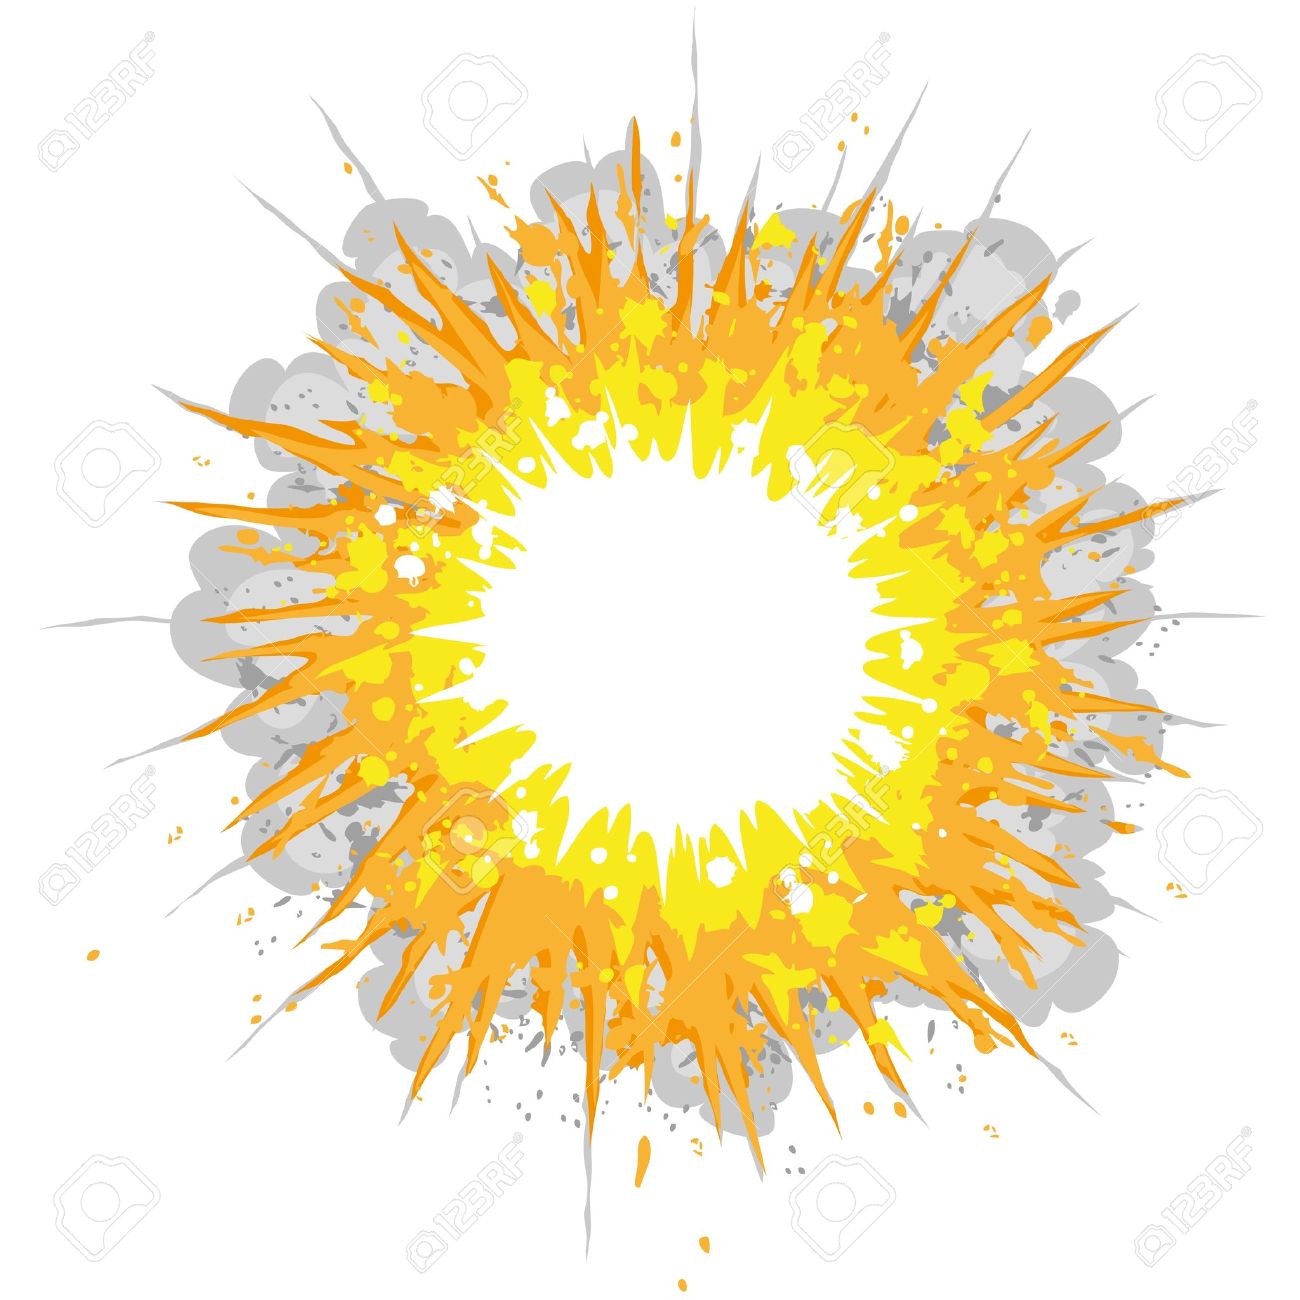 Explosion clip art free free clipart images 4